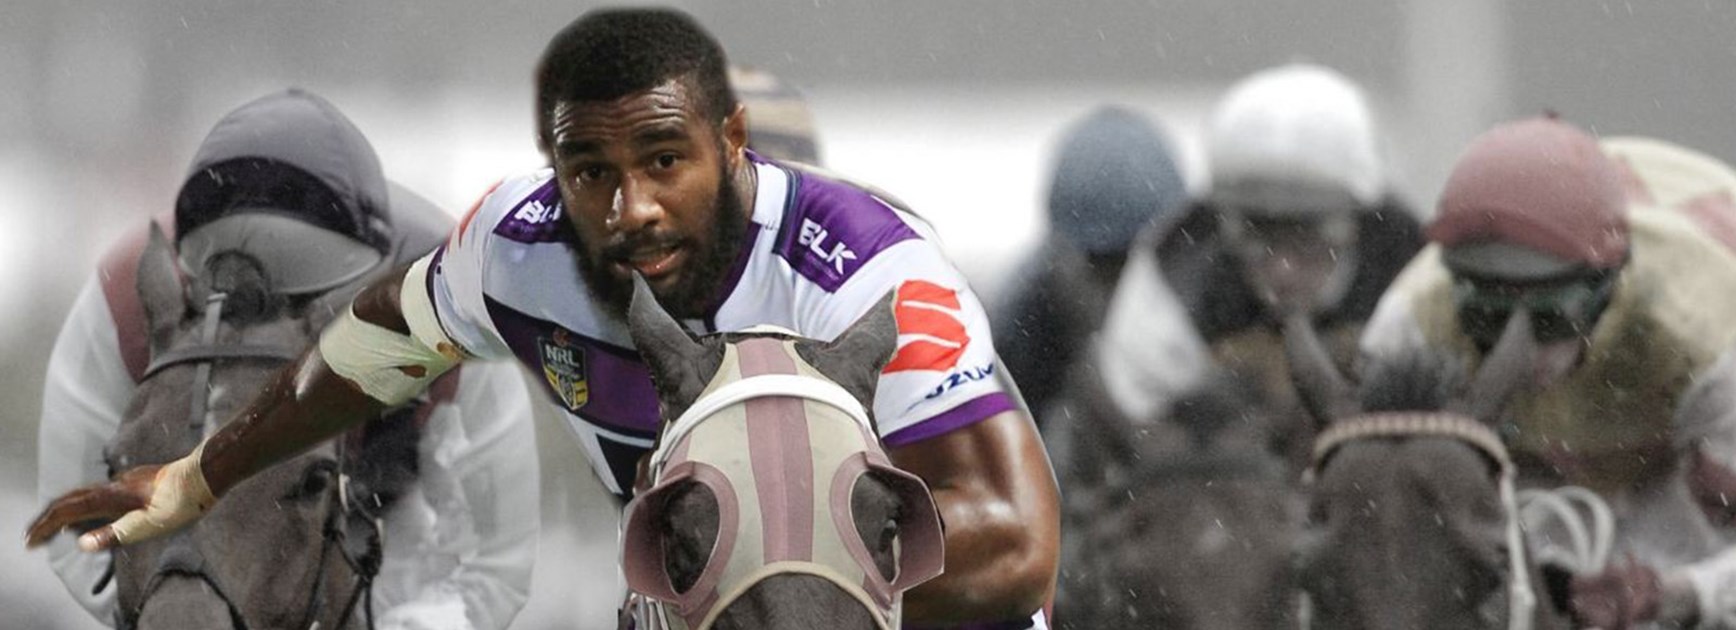 NRL players have their say on who will win the Melbourne Cup.